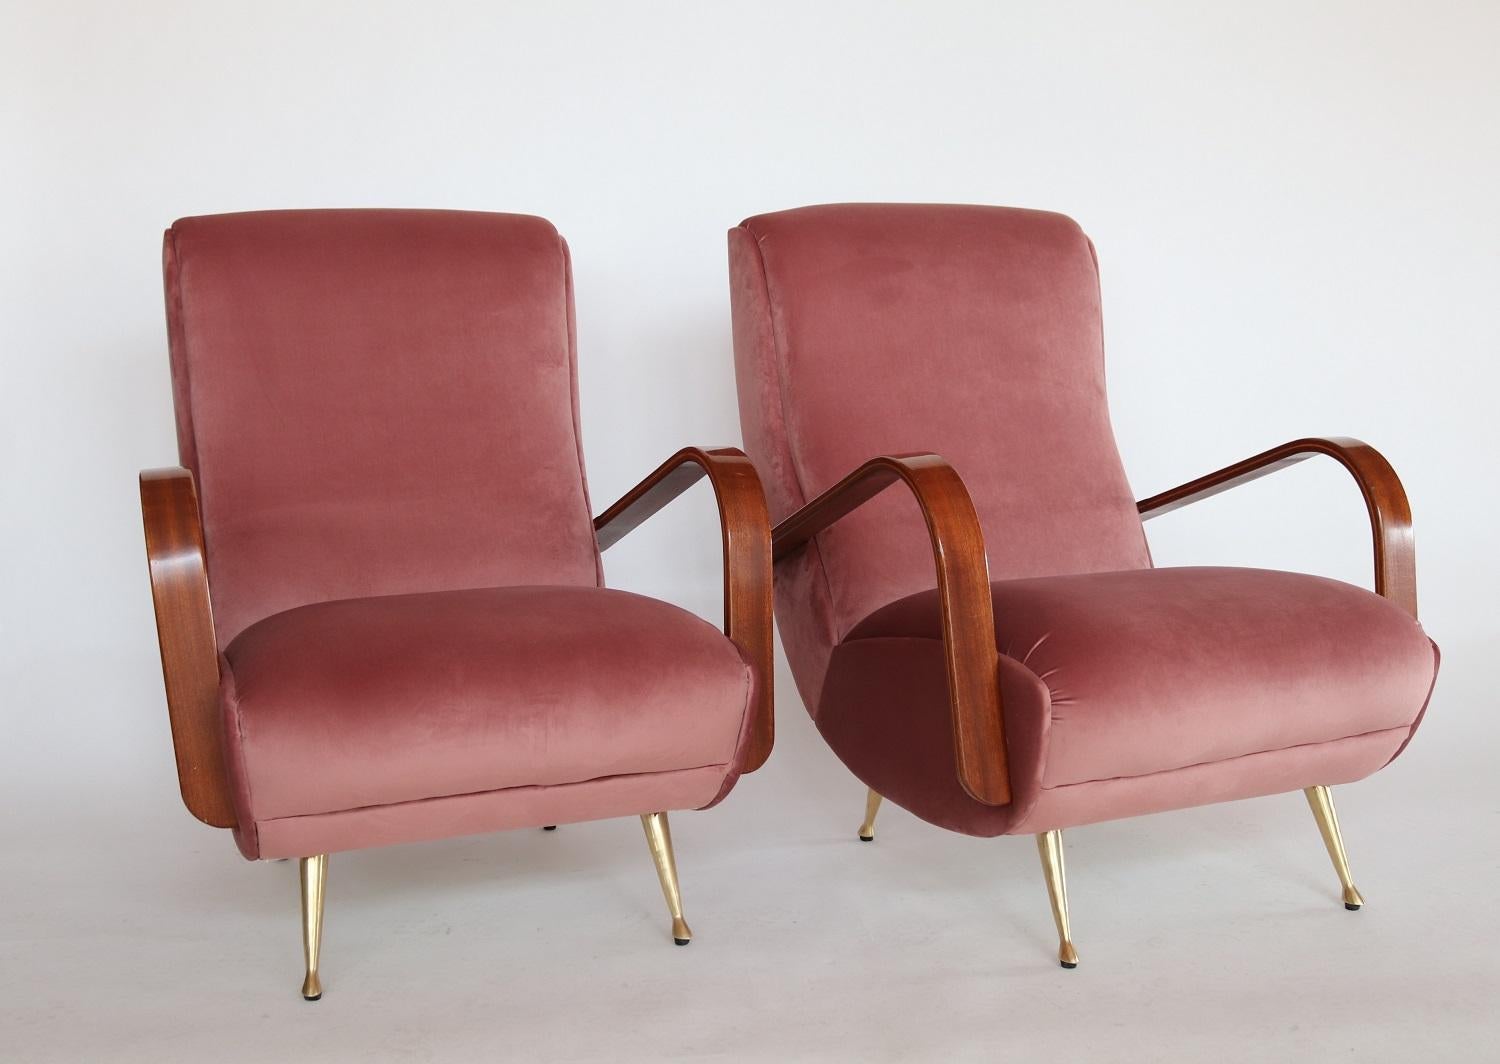 Mid-Century Modern Italian Midcentury Armchairs in Mahogany, Brass and Coral Red Velvet, 1950s